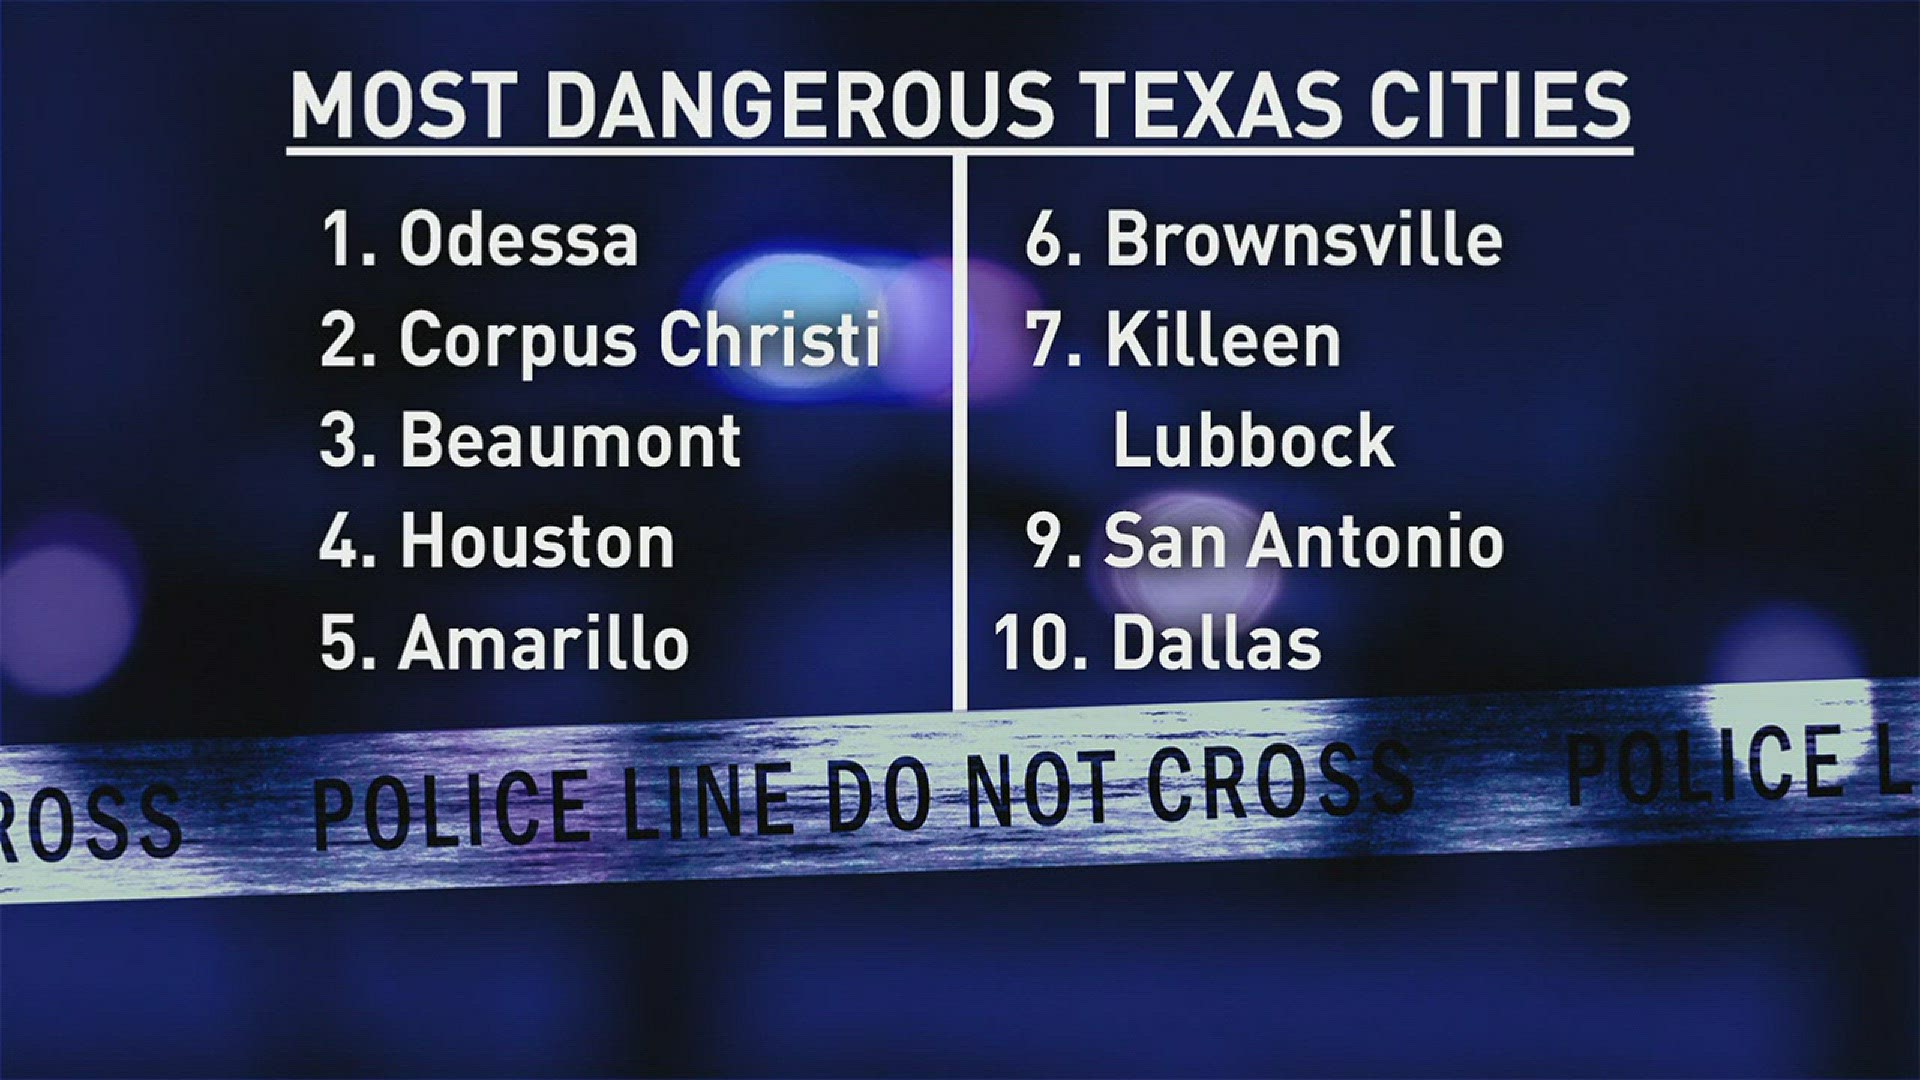 According to a Houston law firm, Beaumont is listed as the third most dangerous city in Texas. Houston is listed as the fourth most dangerous city in Texas.